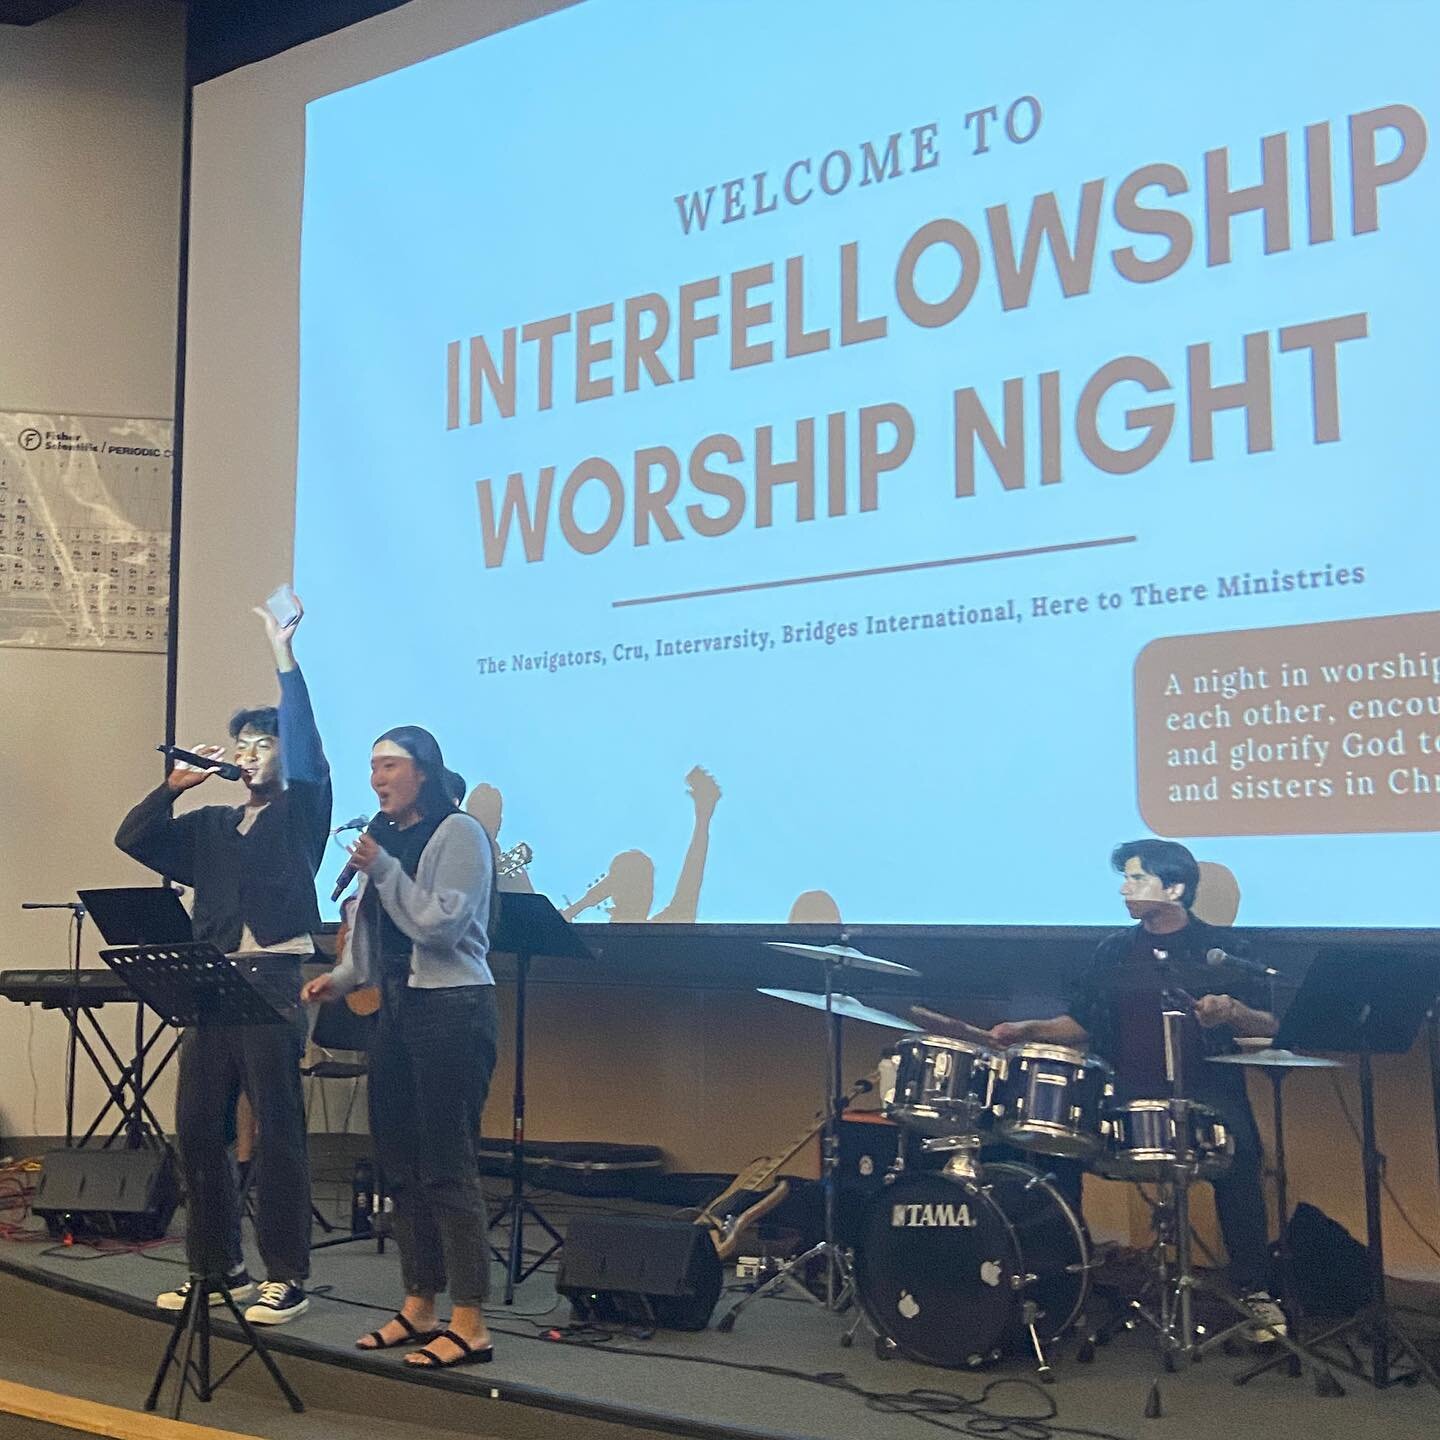 So grateful that we had the opportunity to worship alongside others in our community of believers at Interfellowship Worship Night on Friday! Thanks again to @navs.uci and @ivuci for helping put this event together🎶